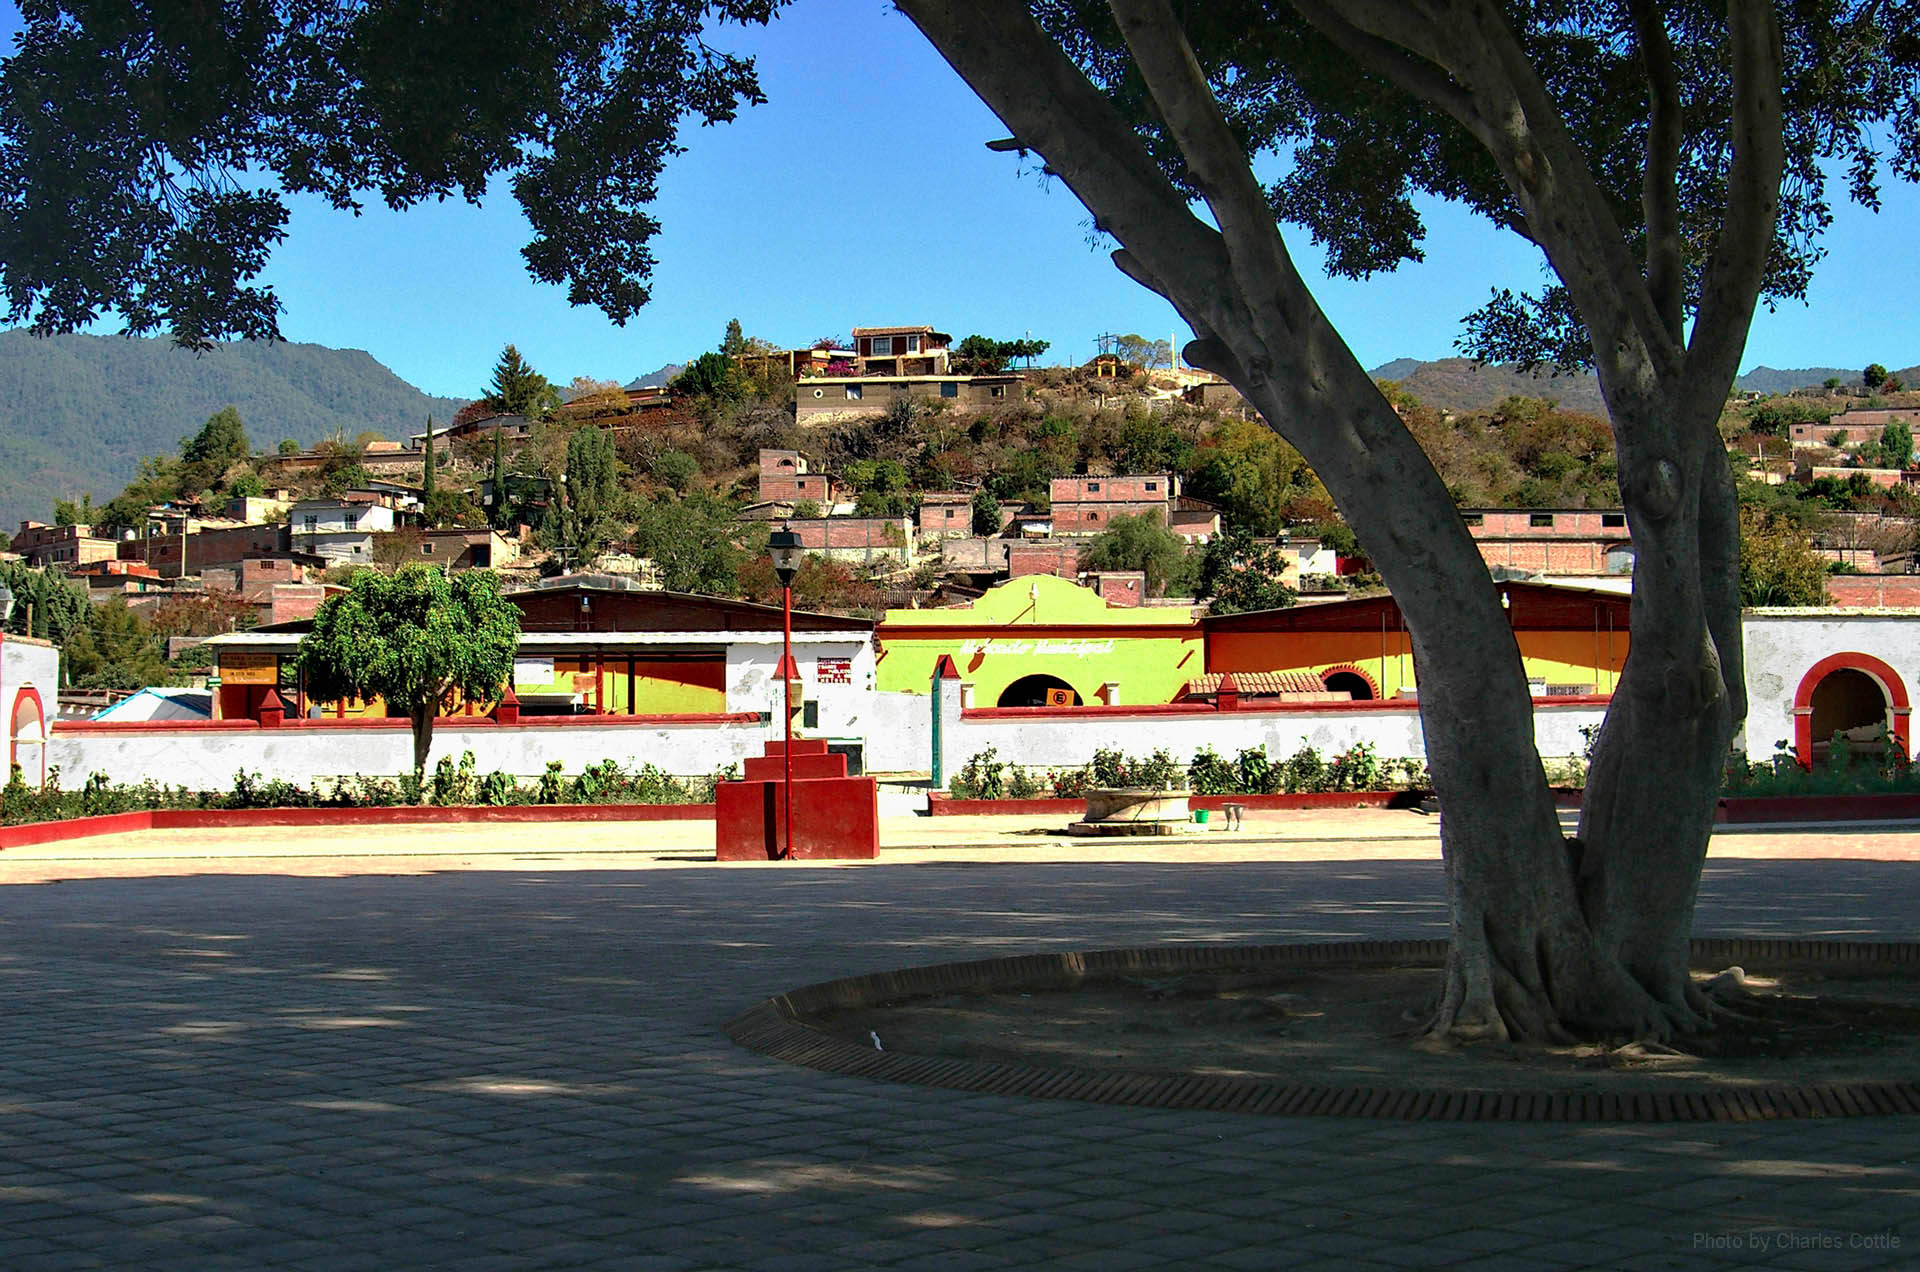 A long view of the village of Teotitlán del Valle, looking up a hill populated with houses from the vantage point of a shade tree in a large courtyard.